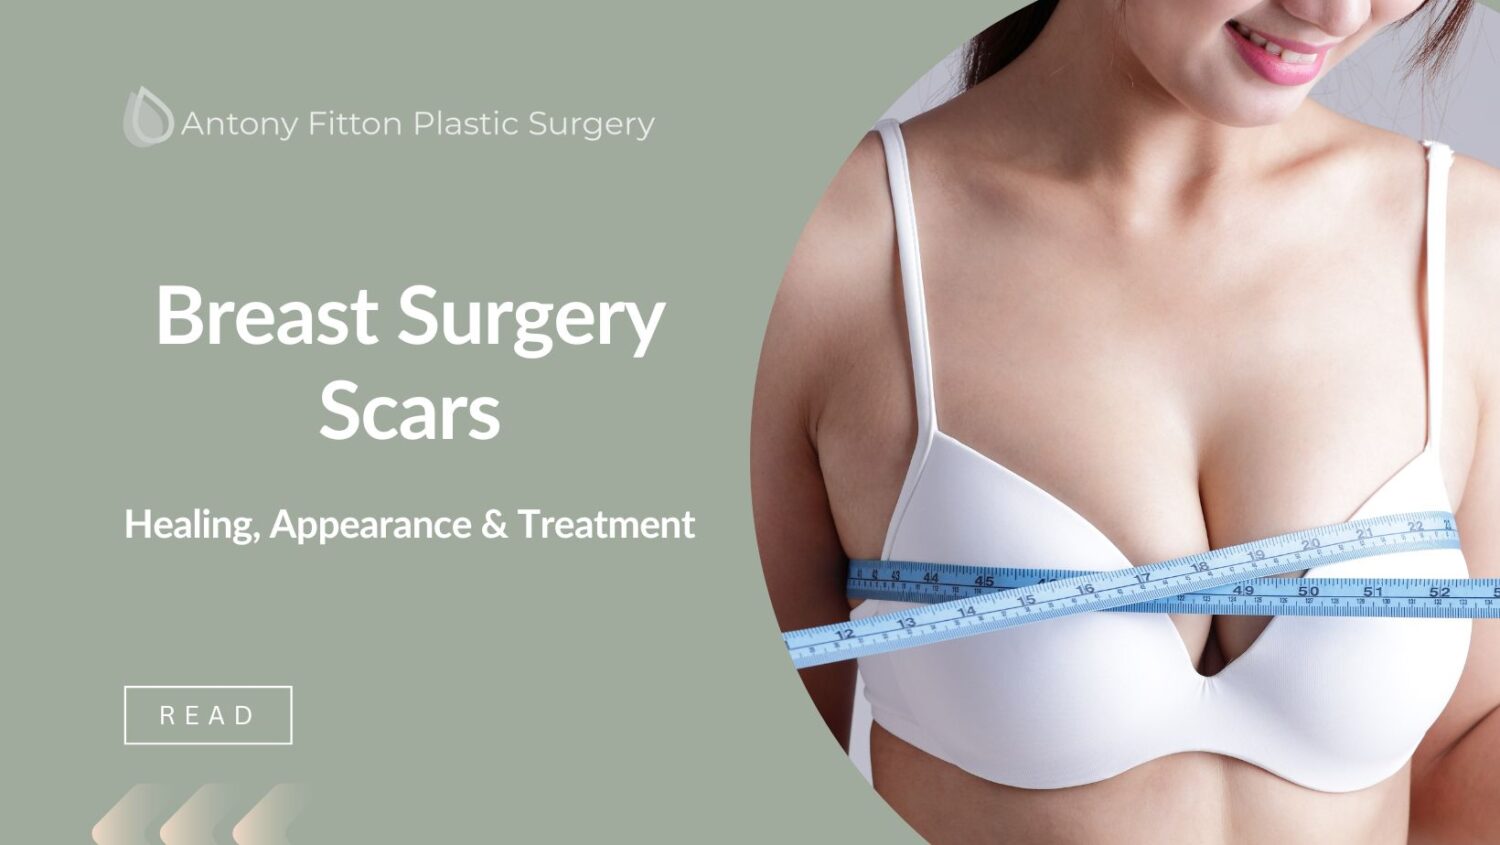 Breast Surgery Scars | Healing, Appearance & Treatment